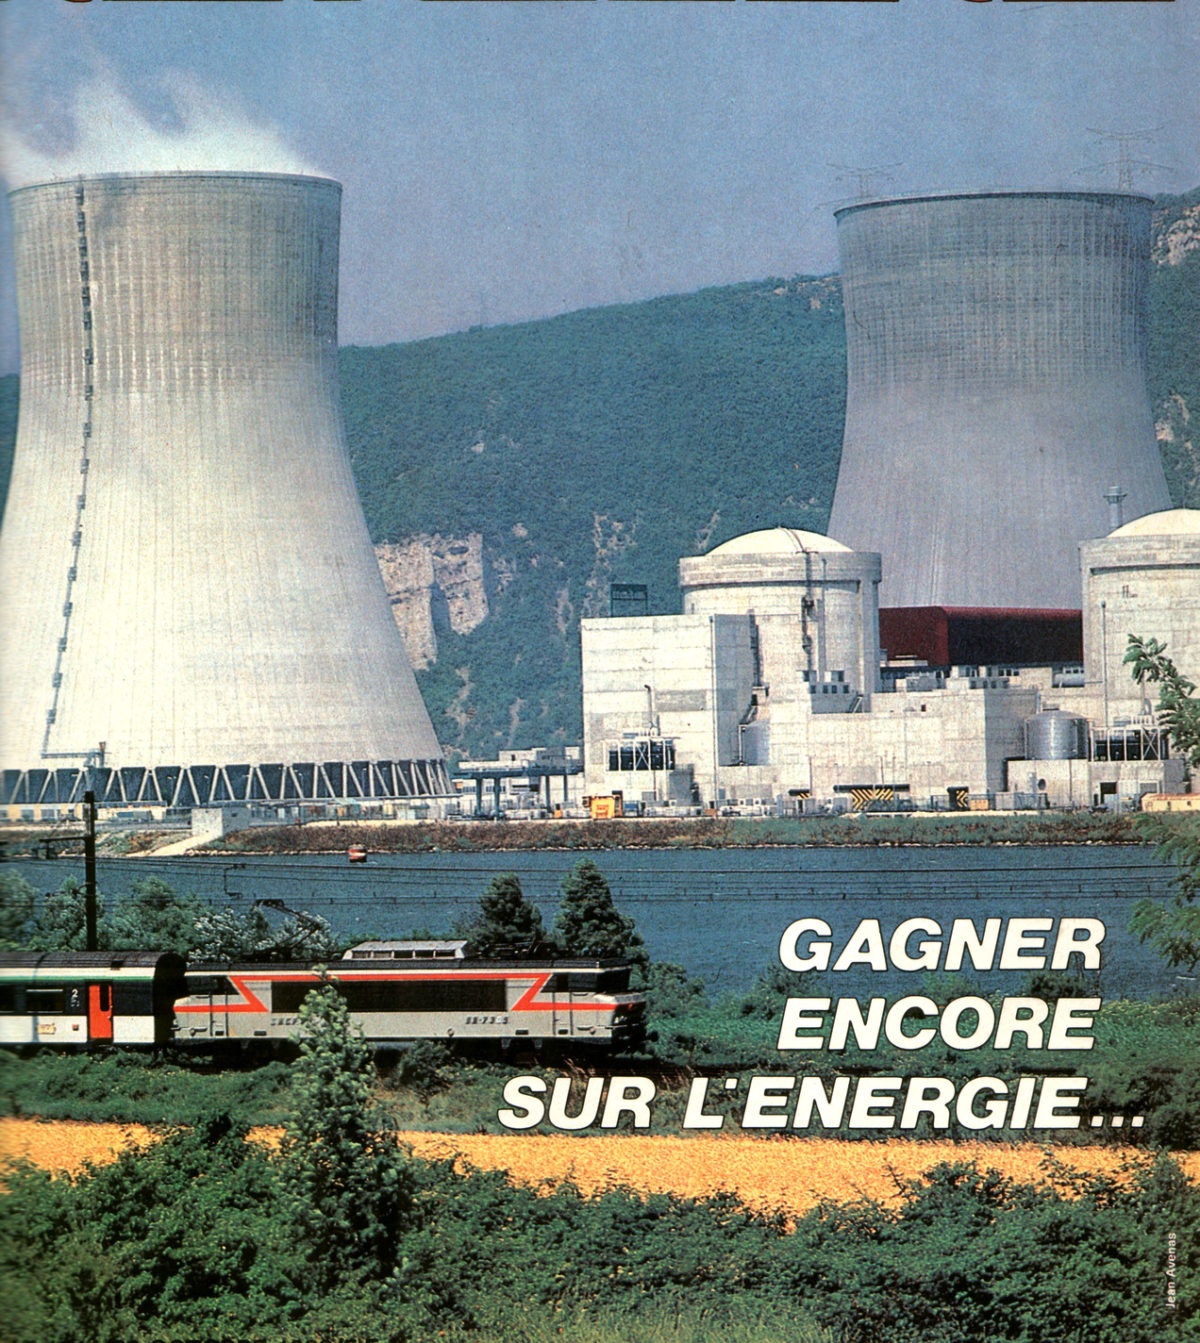 SNCF passenger train passing in front of Cruas nuclear power station.